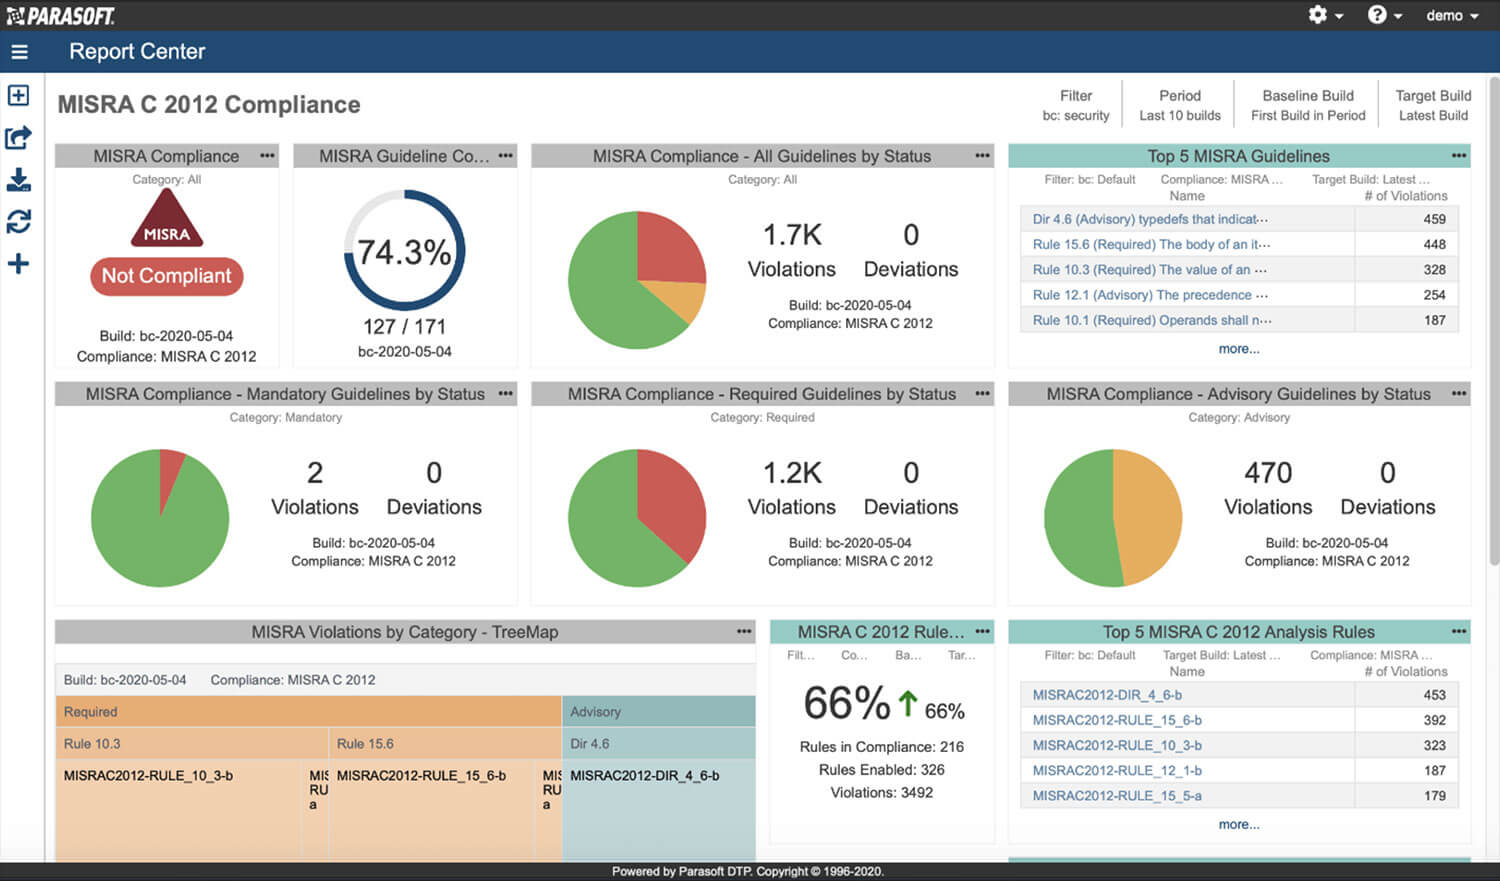 Screenshot of Parasoft's reporting and analytics of MISRA C 20212 Compliance showing pie graphs and other data reflecting code compliance.